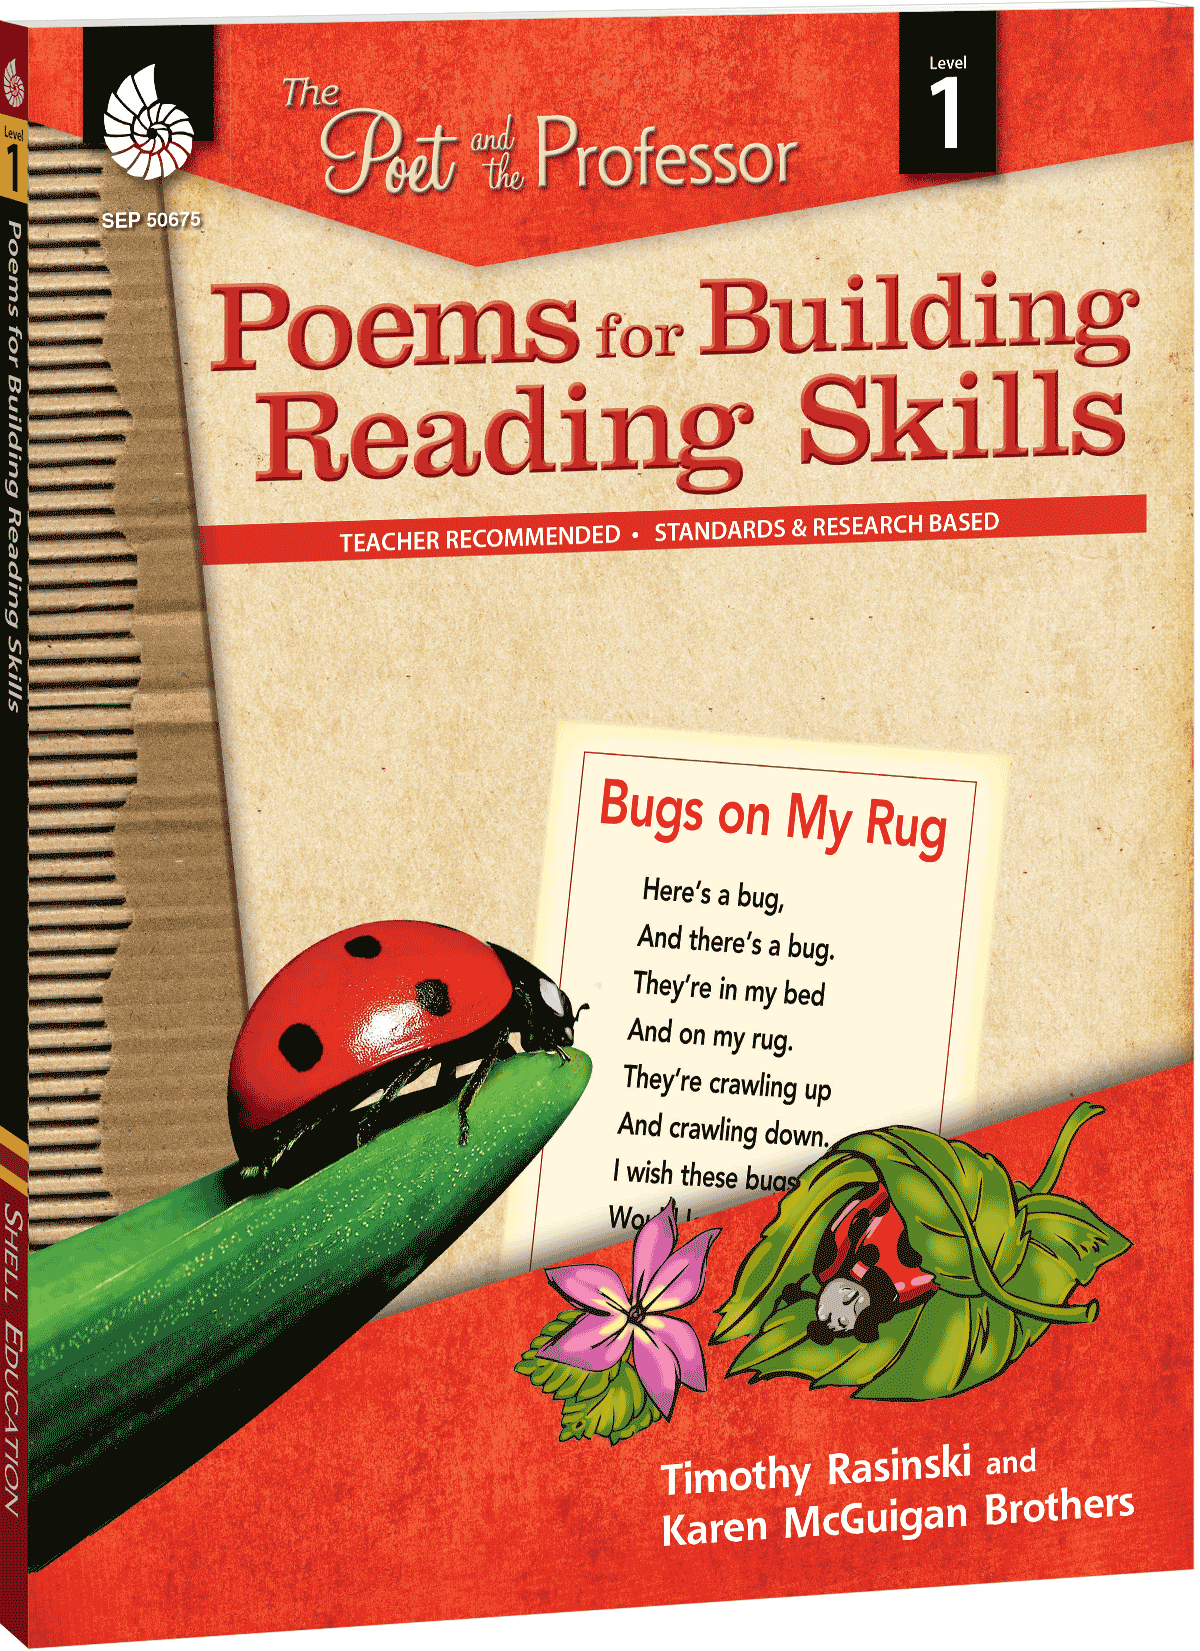 Skills　Created　Level　Teacher　Reading　Building　for　Poems　Materials